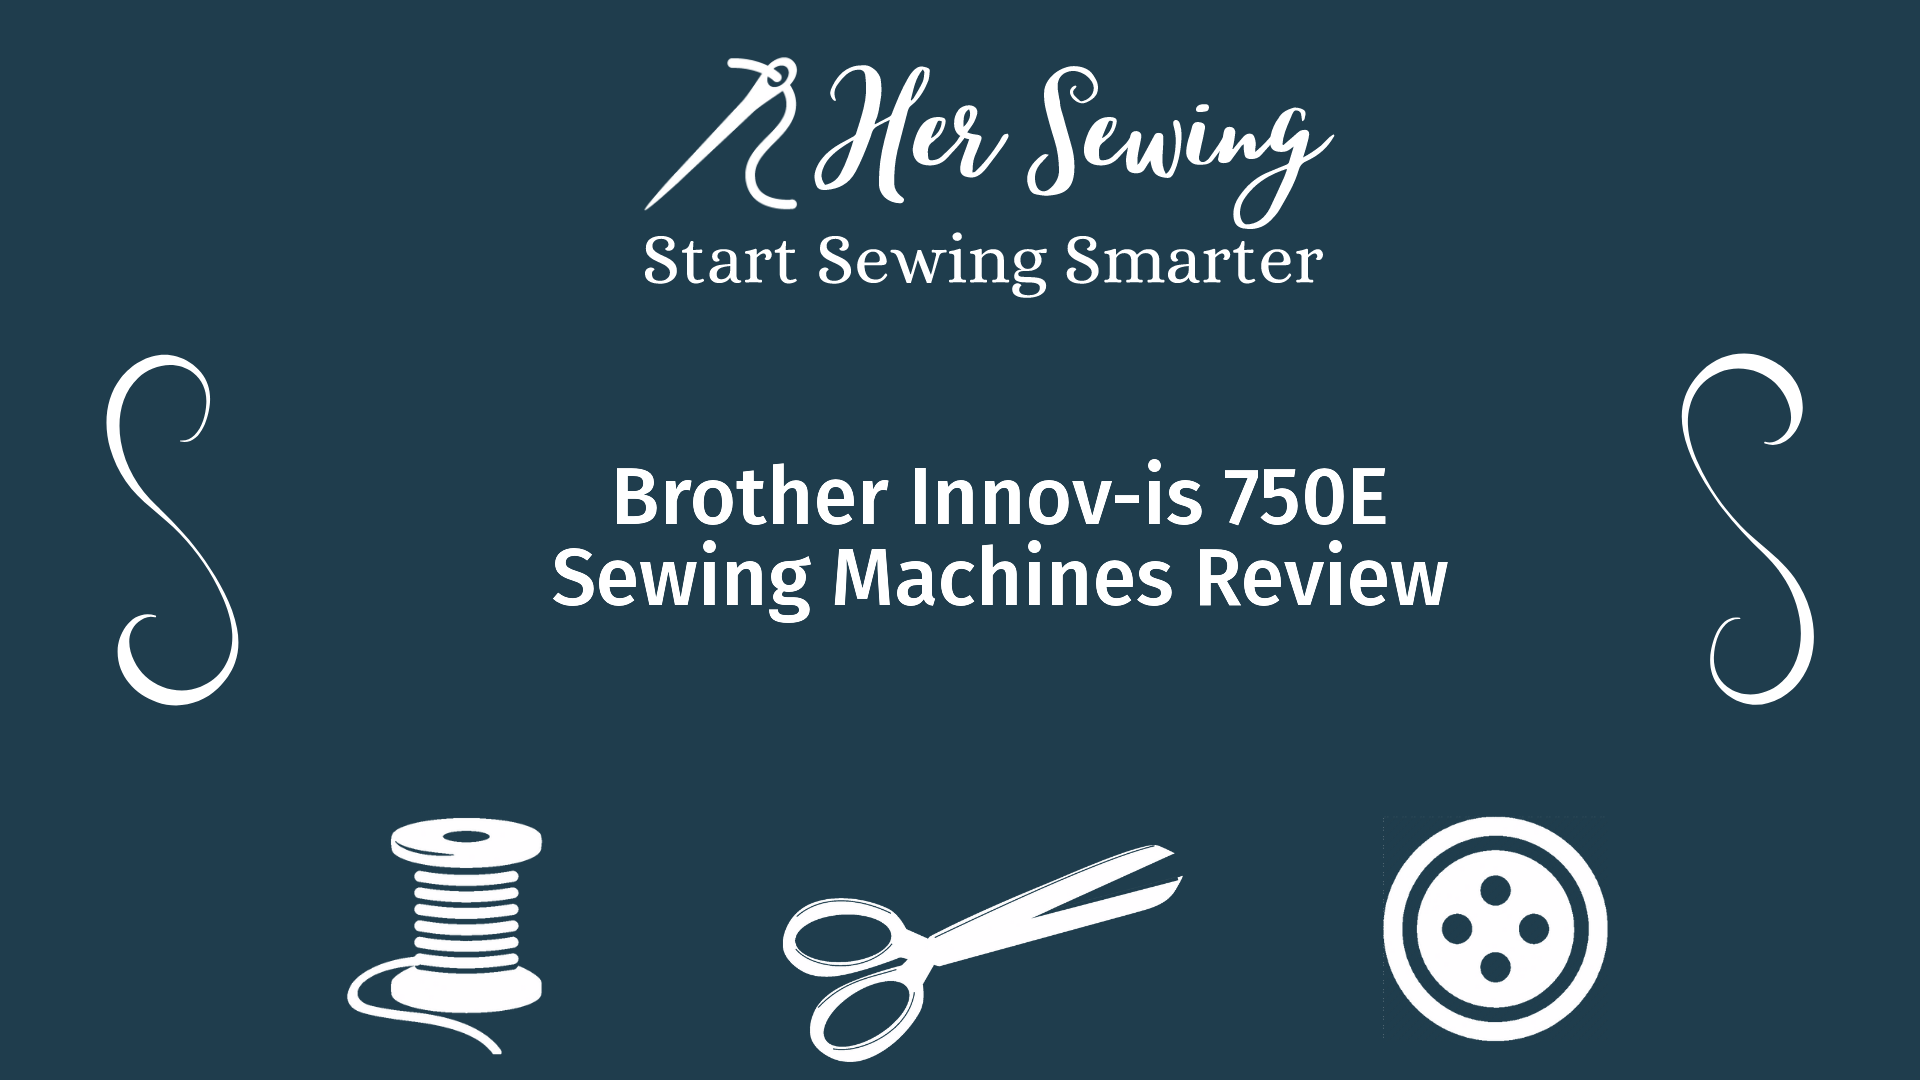 Brother Innov-is 750E Sewing Machines Review